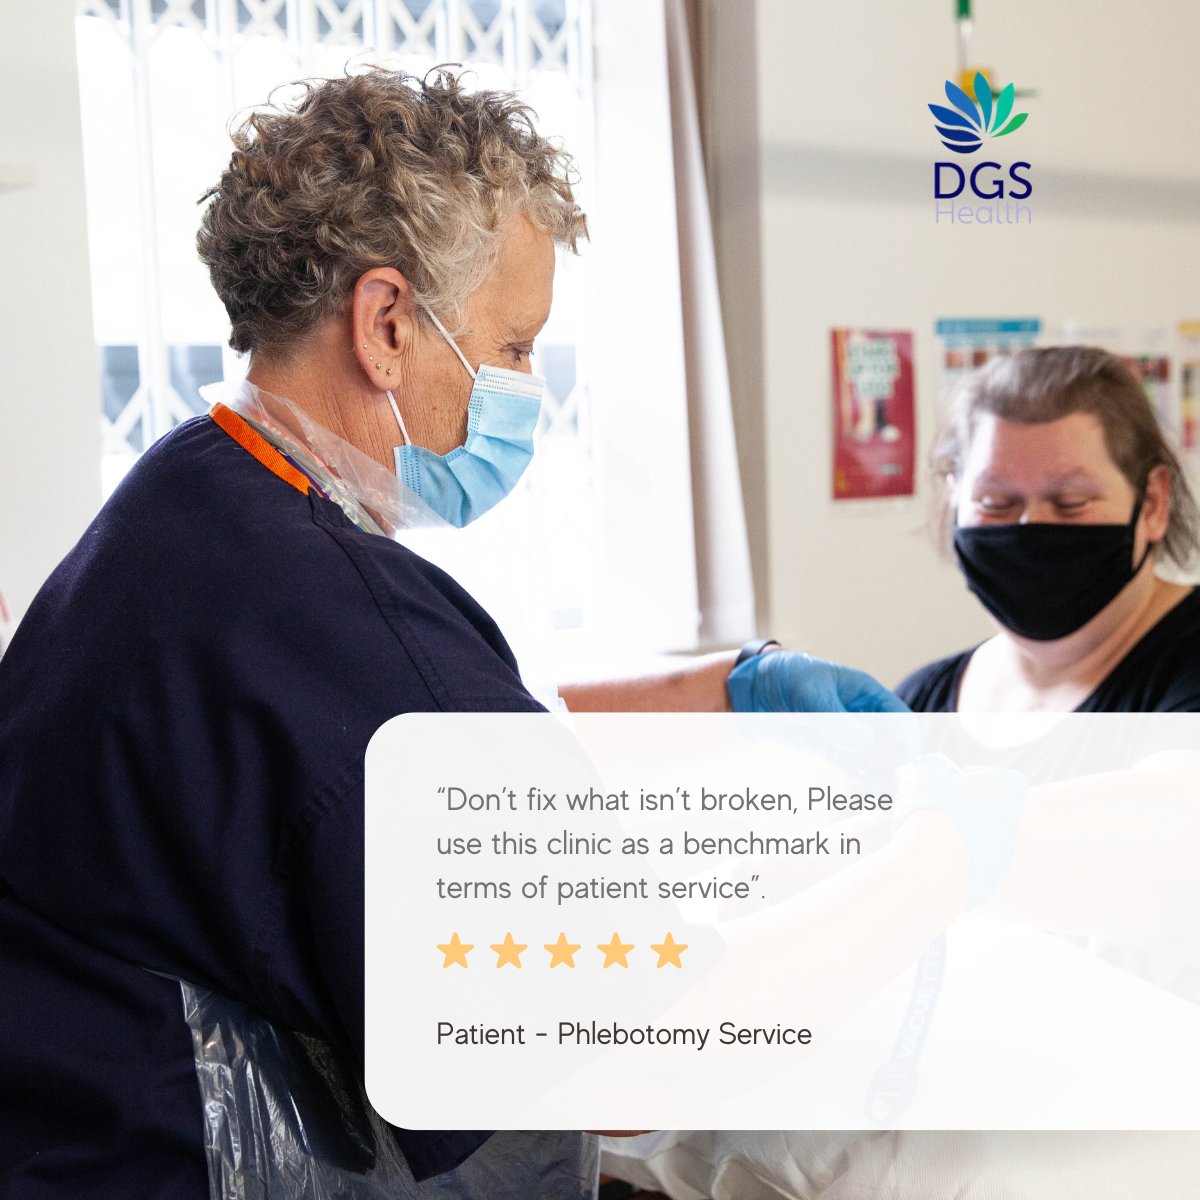 At DGS Health, our phlebotomist Joy is receiving glowing patient feedback! 📷 Thank you for sharing your positive experiences with us. We're committed to providing exceptional care every step of the way. #PatientCare #Phlebotomy #DGSHealth